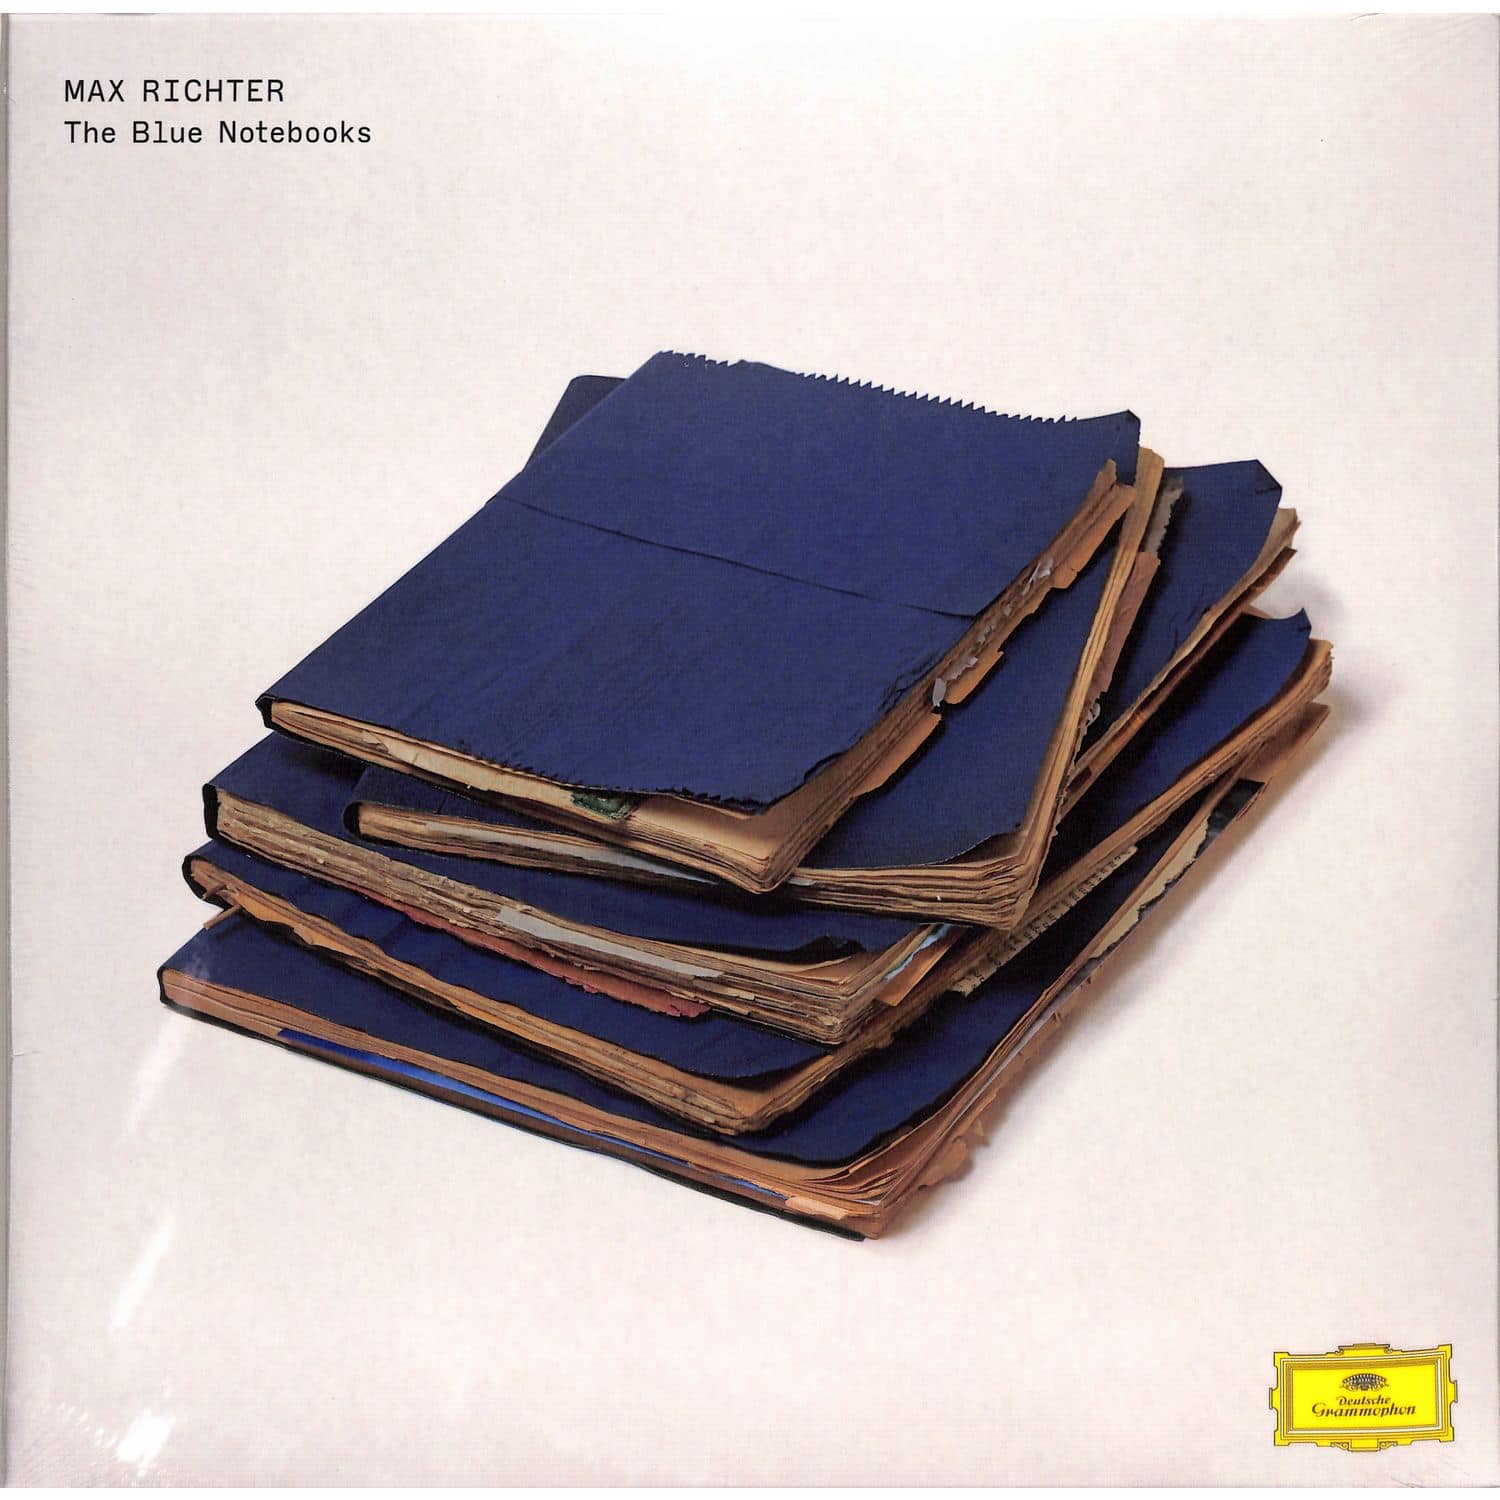 Max Richter - THE BLUE NOTEBOOKS - 15 YEARS 